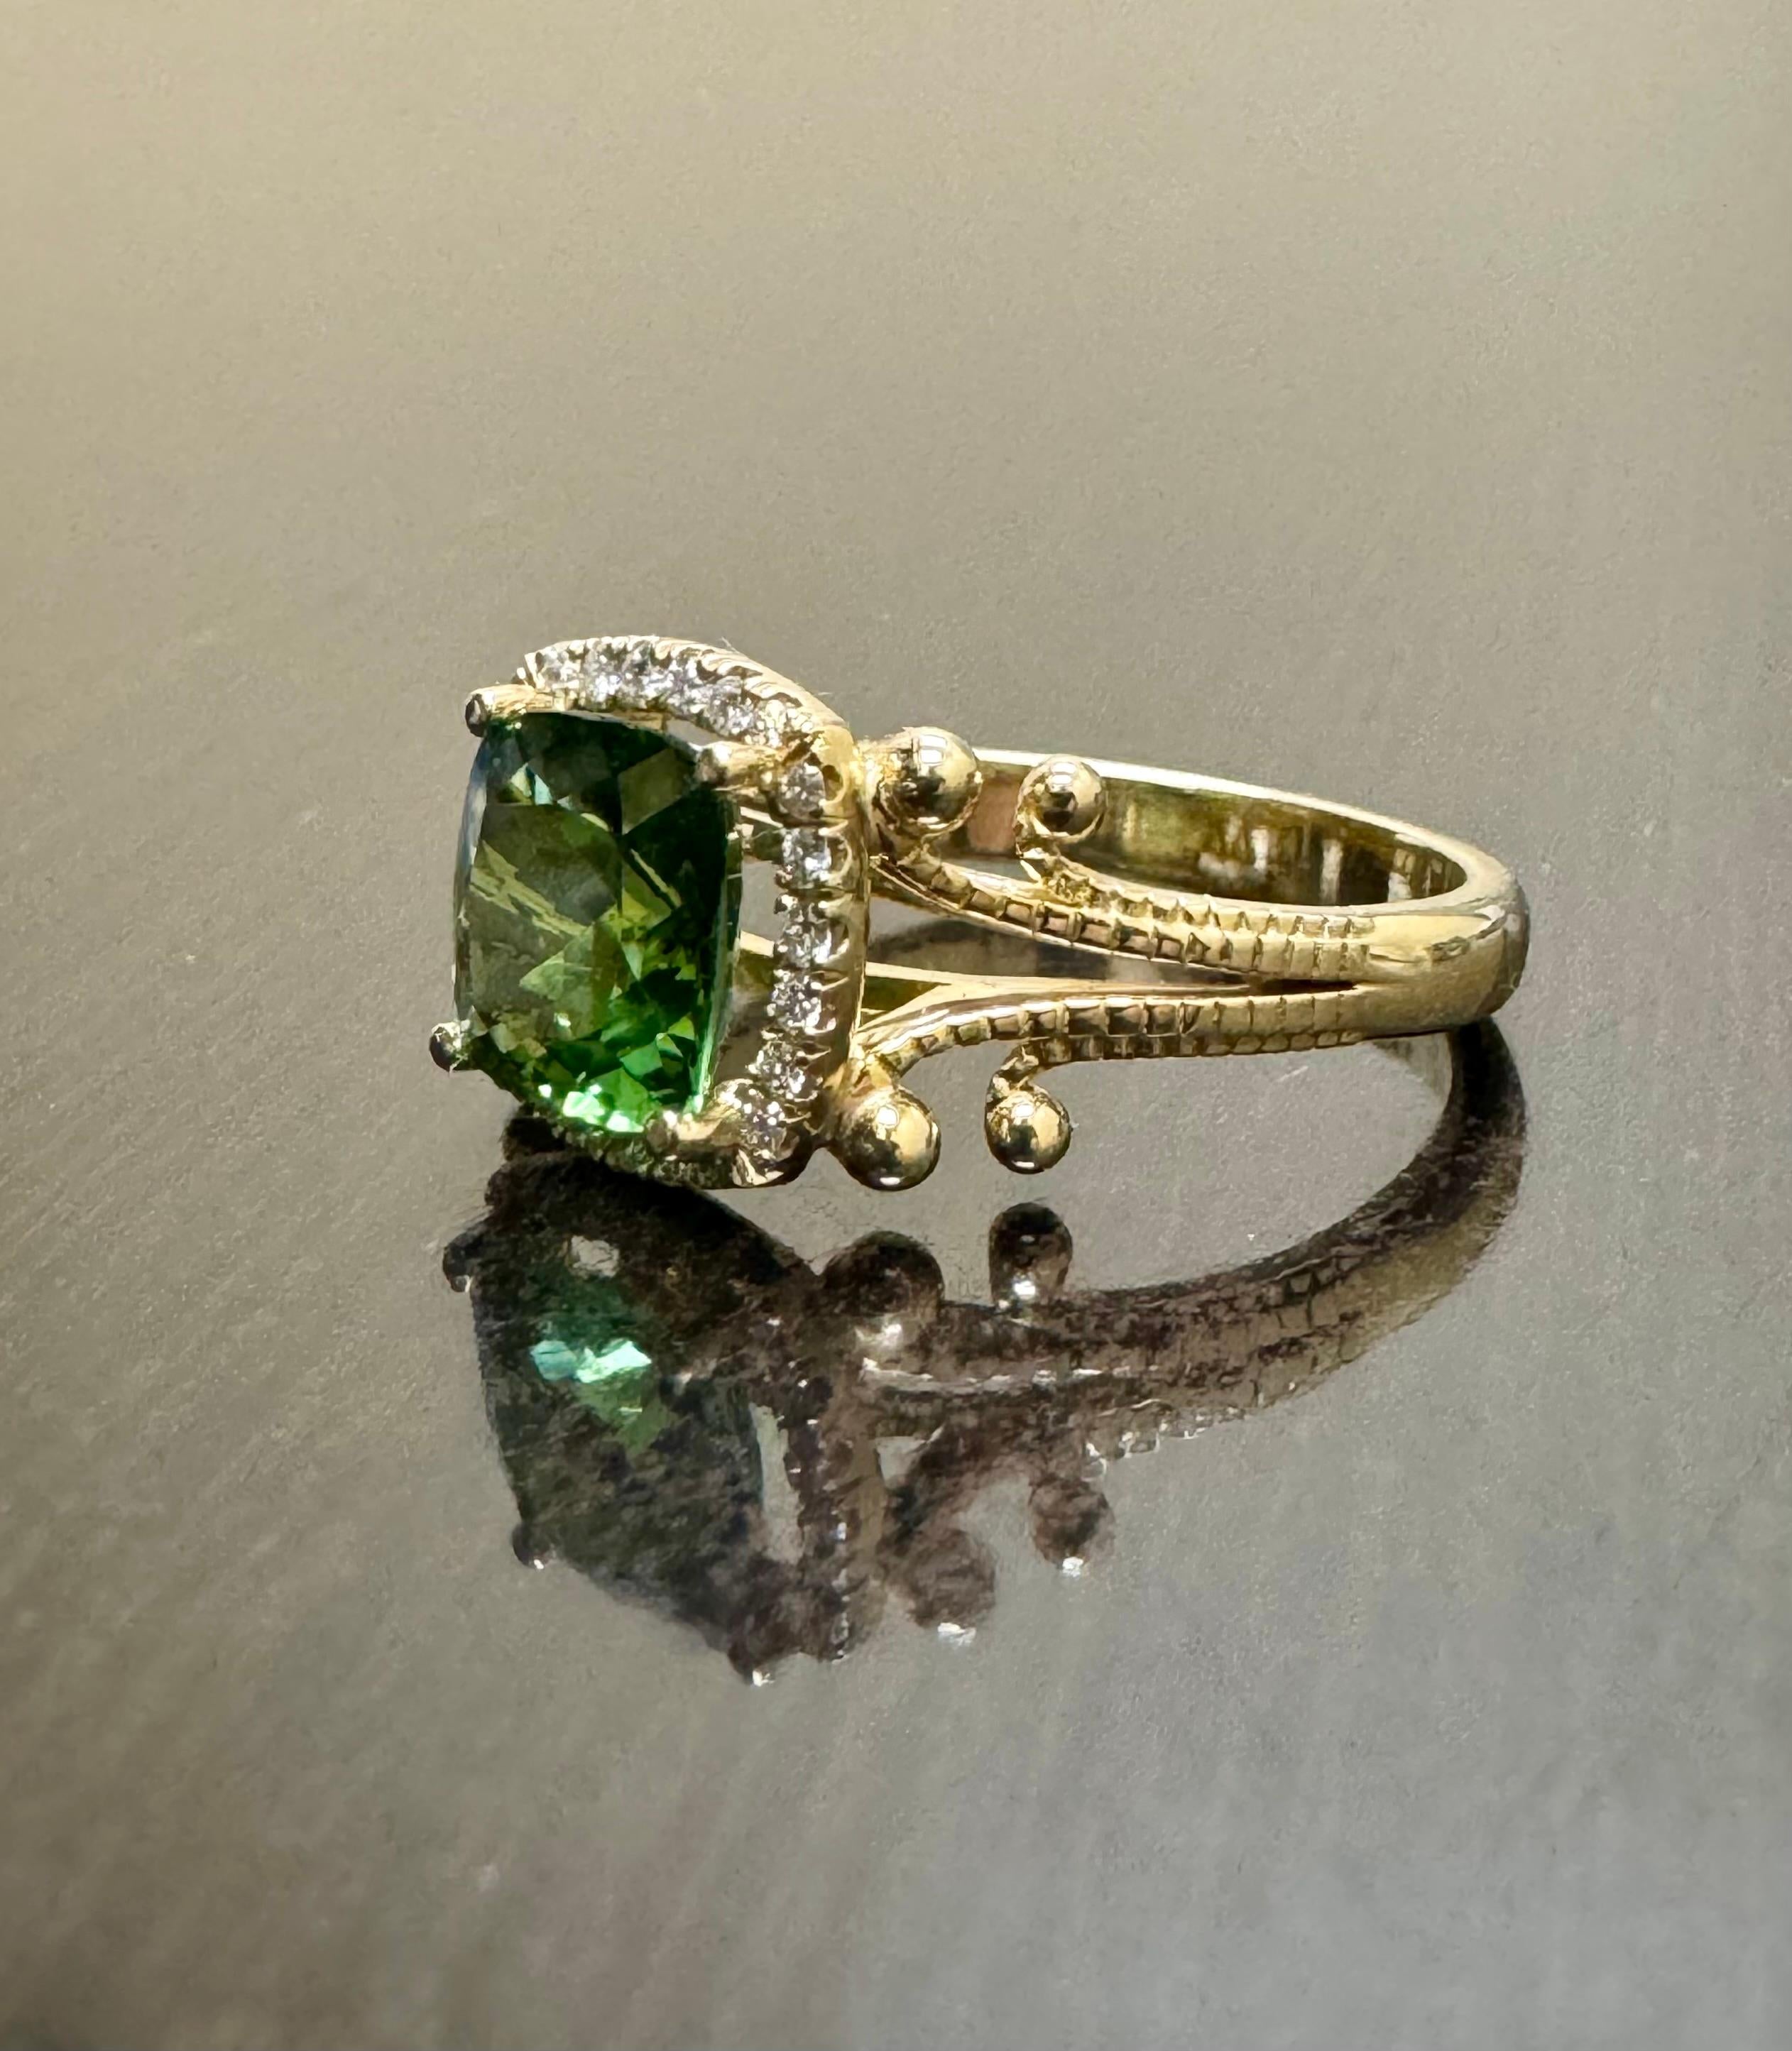 14K Yellow Gold Halo Cushion Cut 1.82 Carat Green Tourmaline Engagement Ring In New Condition For Sale In Los Angeles, CA